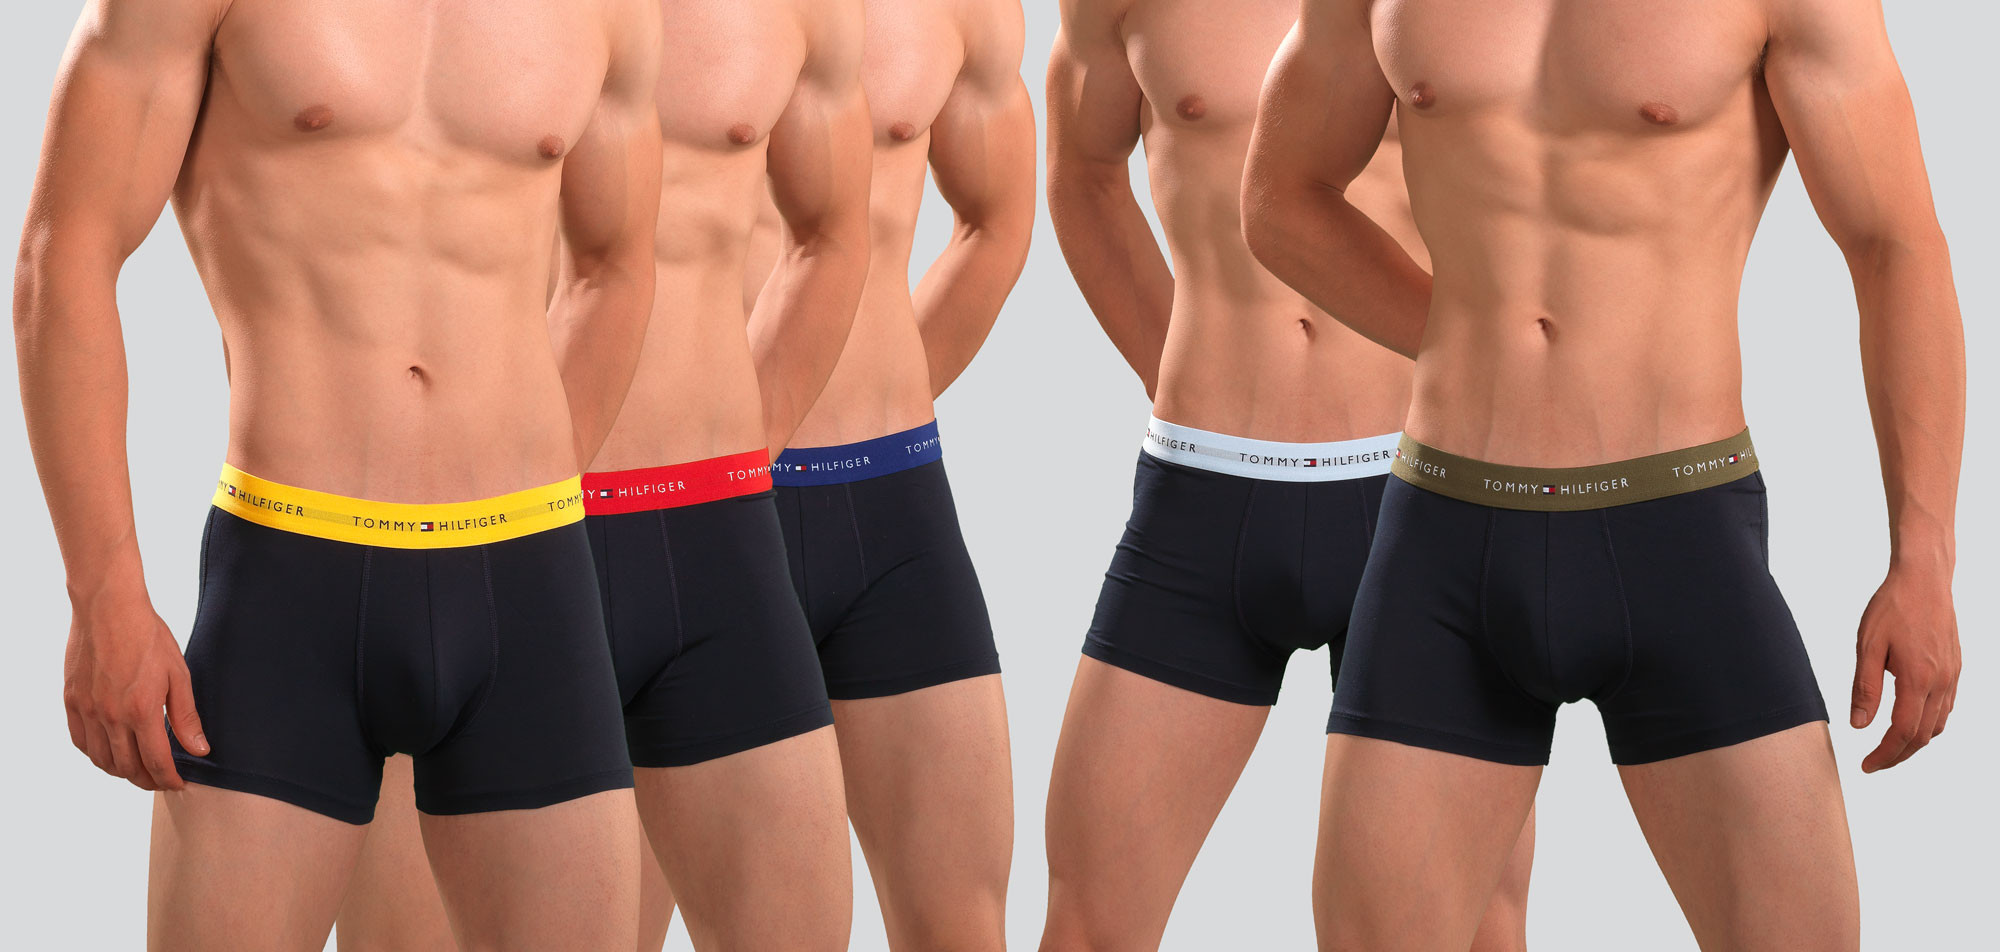 Tommy Hilfiger Trunk 5-Pack 061 WB,